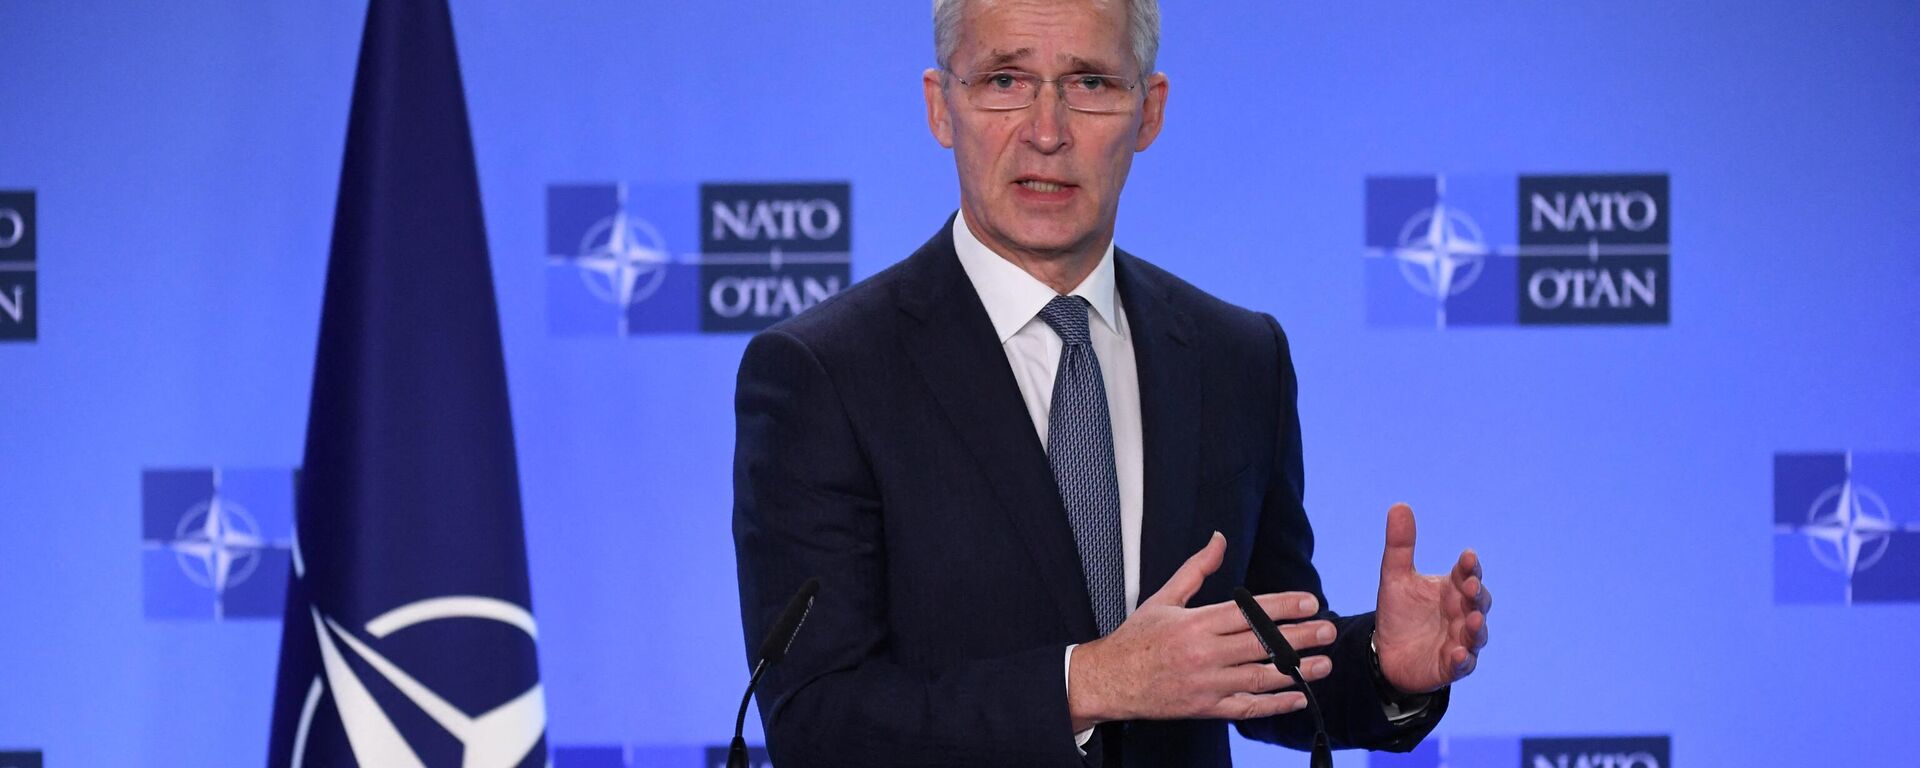 NATO Secretary General Jens Stoltenberg gestures as he speaks during a joint press conference with Ukraine's Deputy Prime Minister for European and Euro-Atlantic Integration after their bilateral meeting at the NATO headquarters in Brussels on January 10, 2022.  - Sputnik International, 1920, 29.11.2023